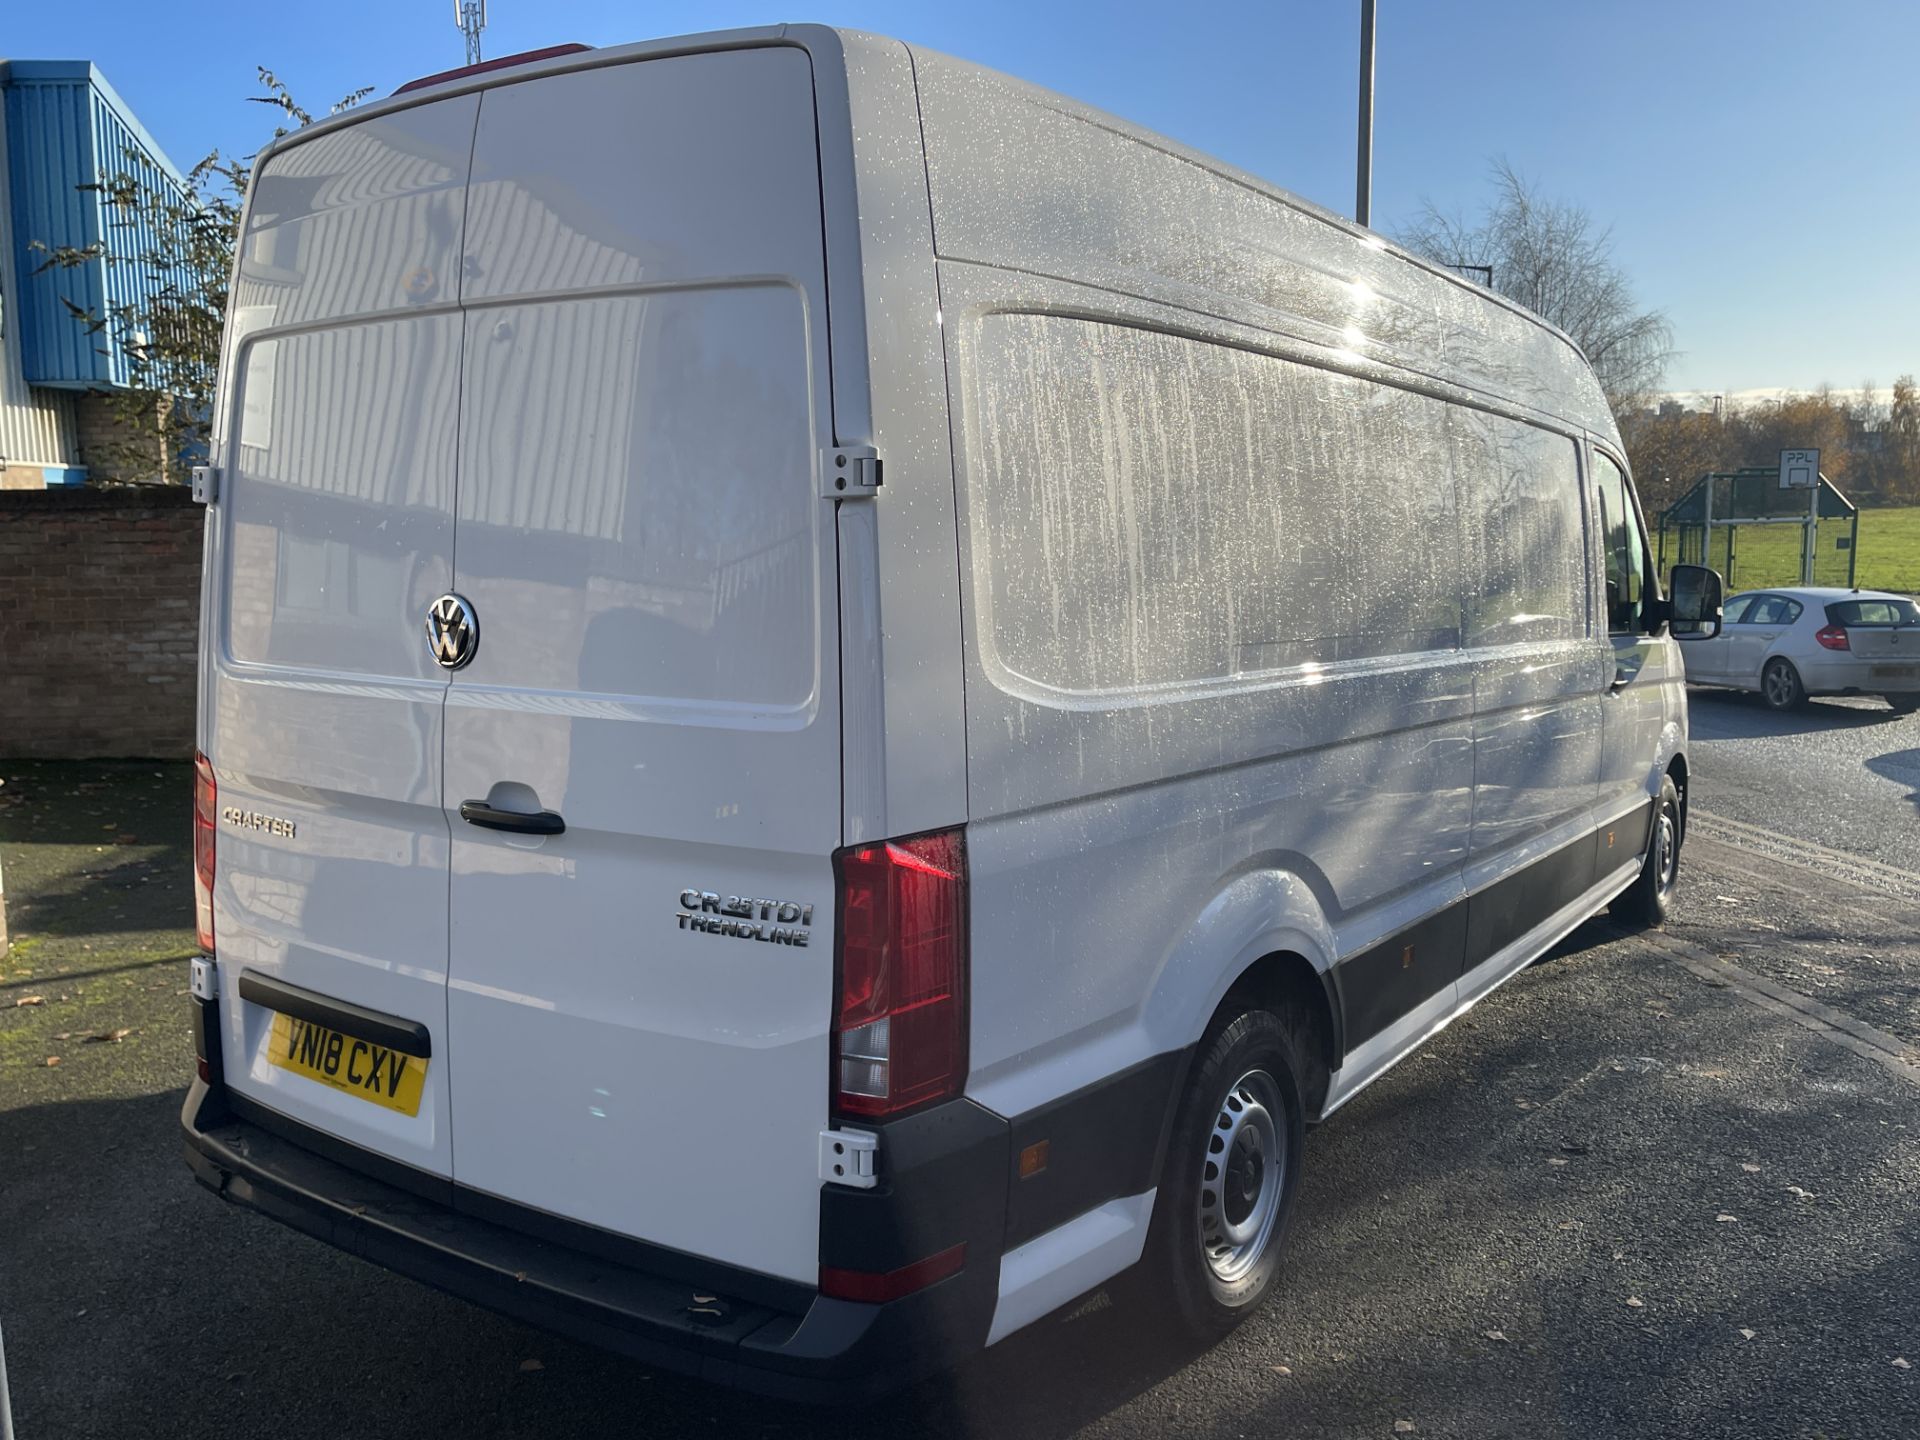 2018 - VW Crafter CR35 102PS Trend Line LWB TDI - Image 7 of 34